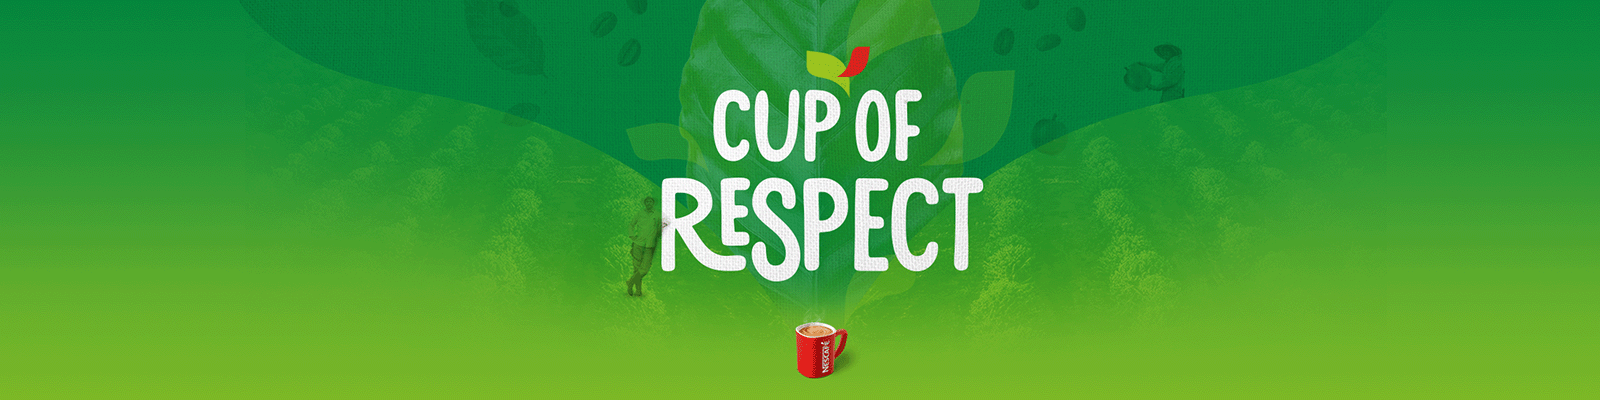 Cup of Respect